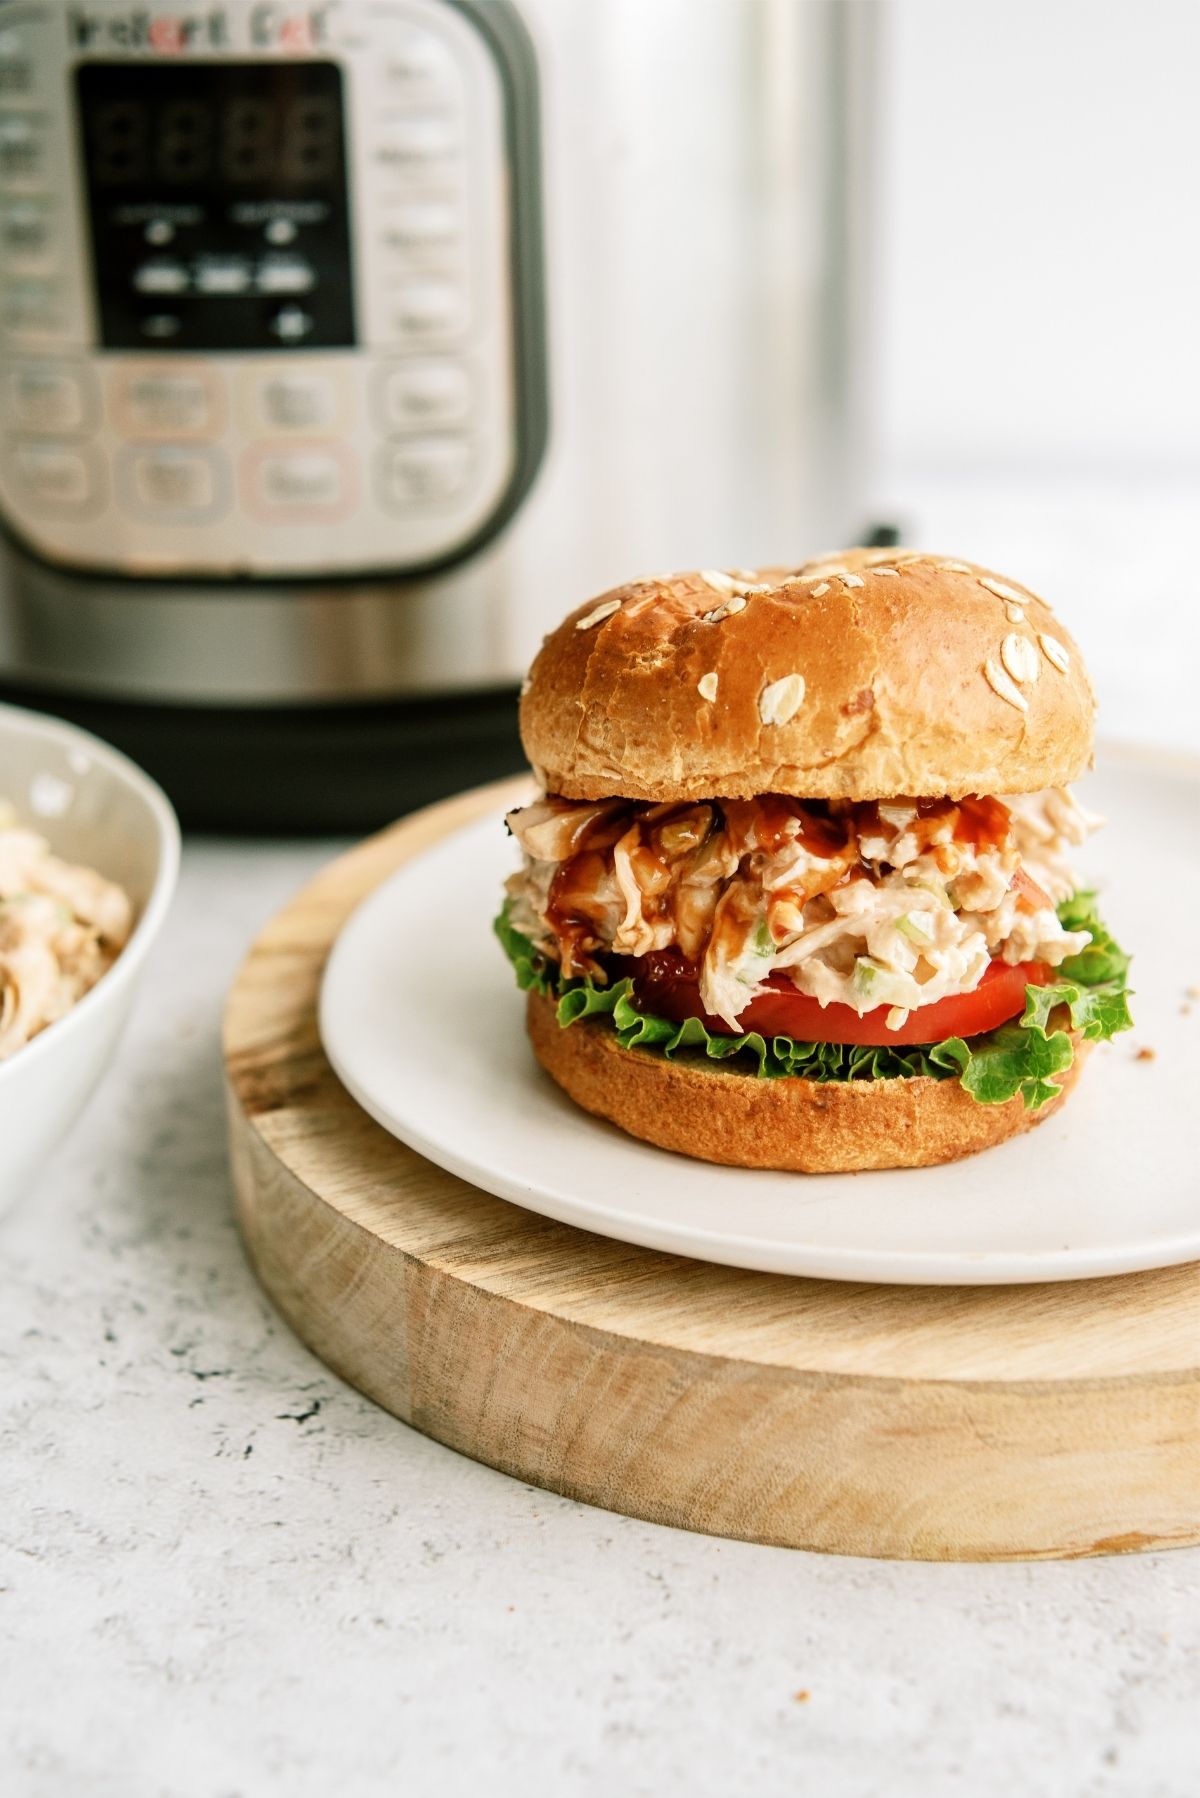 BBQ Chicken Salad Sandwich on a plate with an Instant Pot in the background